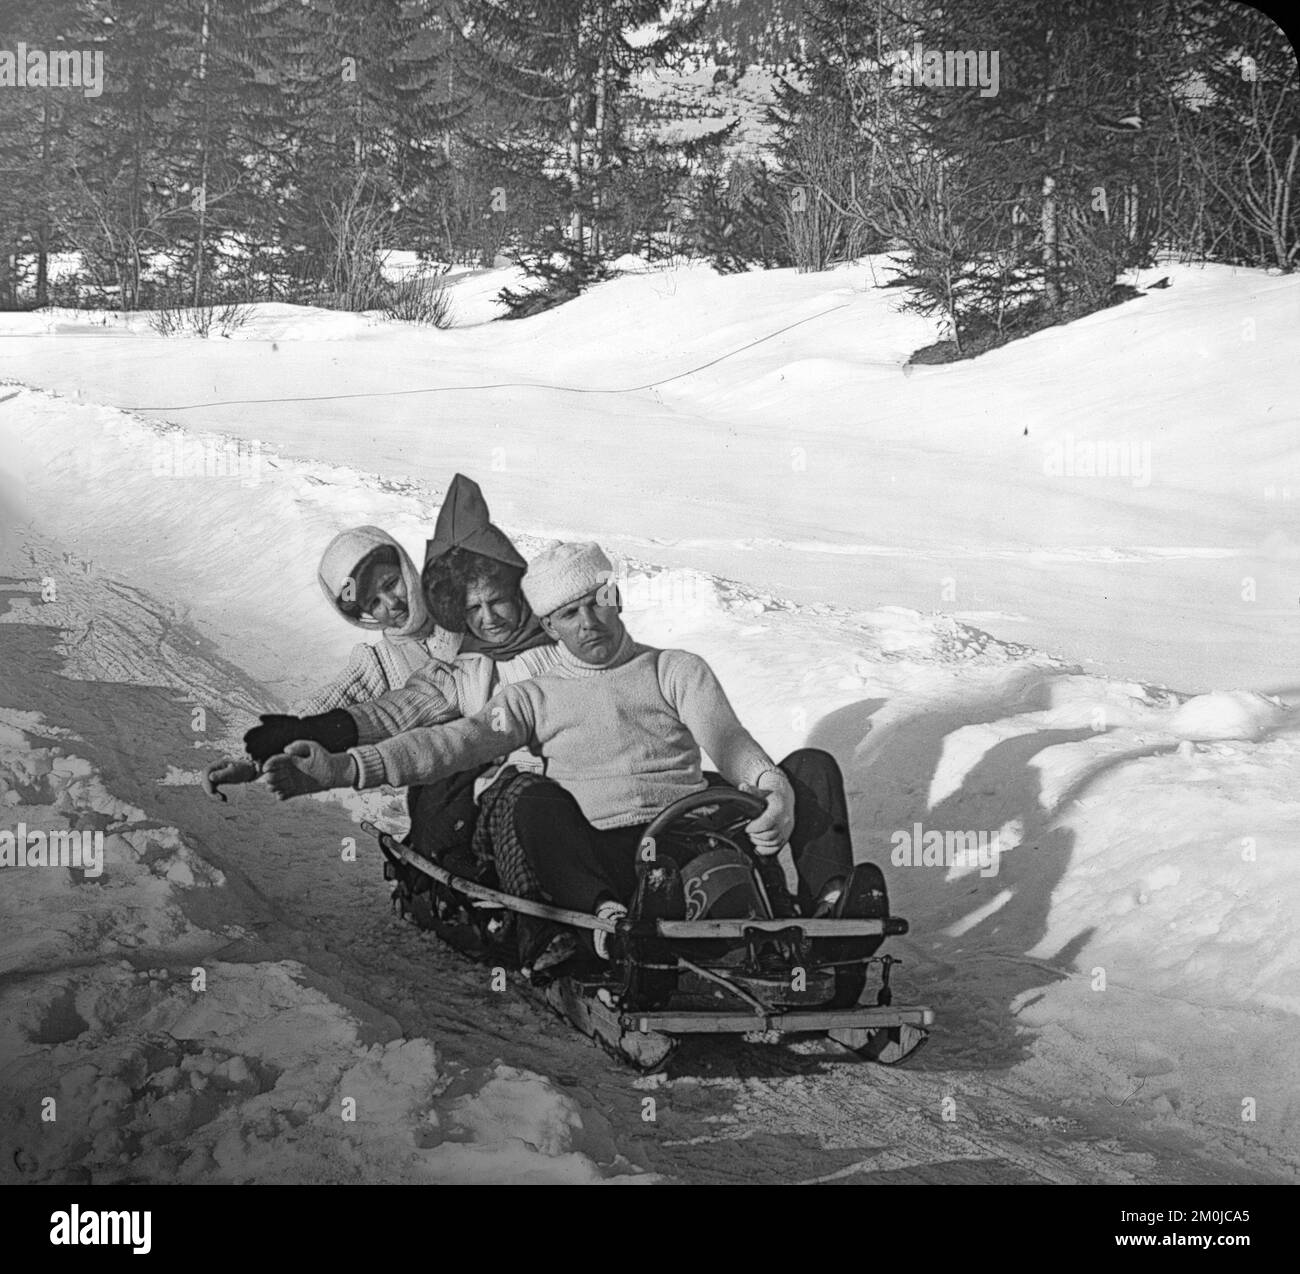 Early 20th century vintage photograph taken in the French Alps, showing three people on a toboggan, or an early type of Bob-Sleigh. Stock Photo